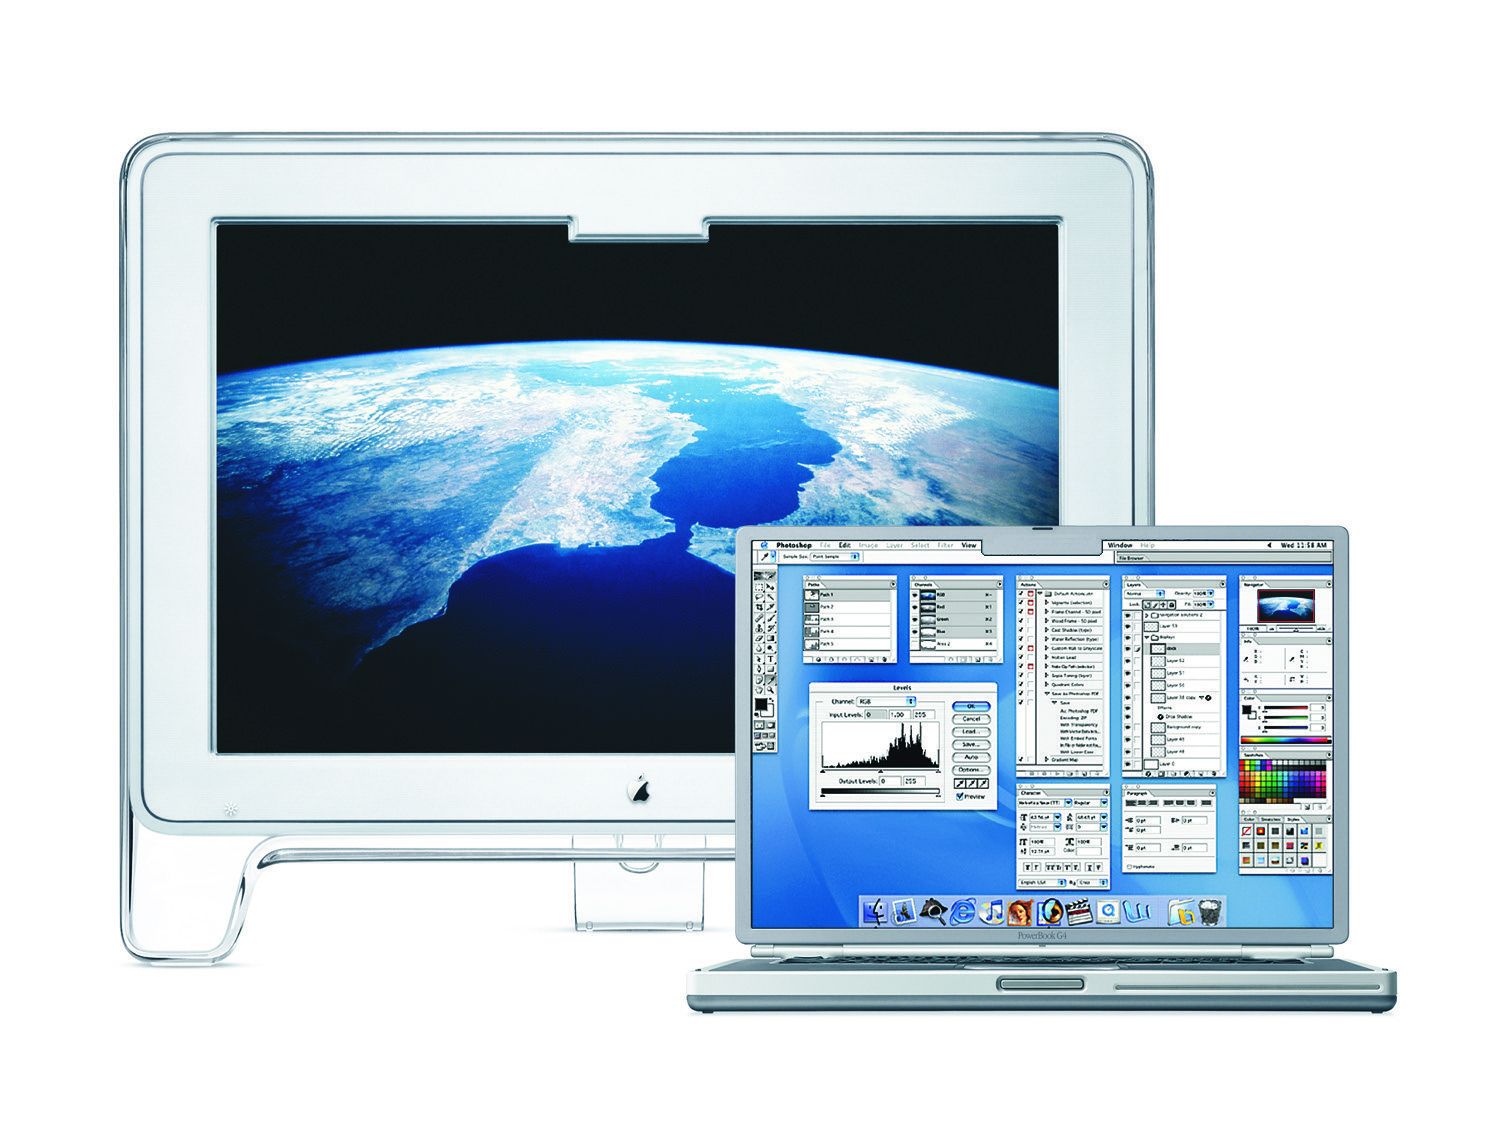 Titanium PowerBook G4 and Apple Cinema HD Display with notches in their LCDs